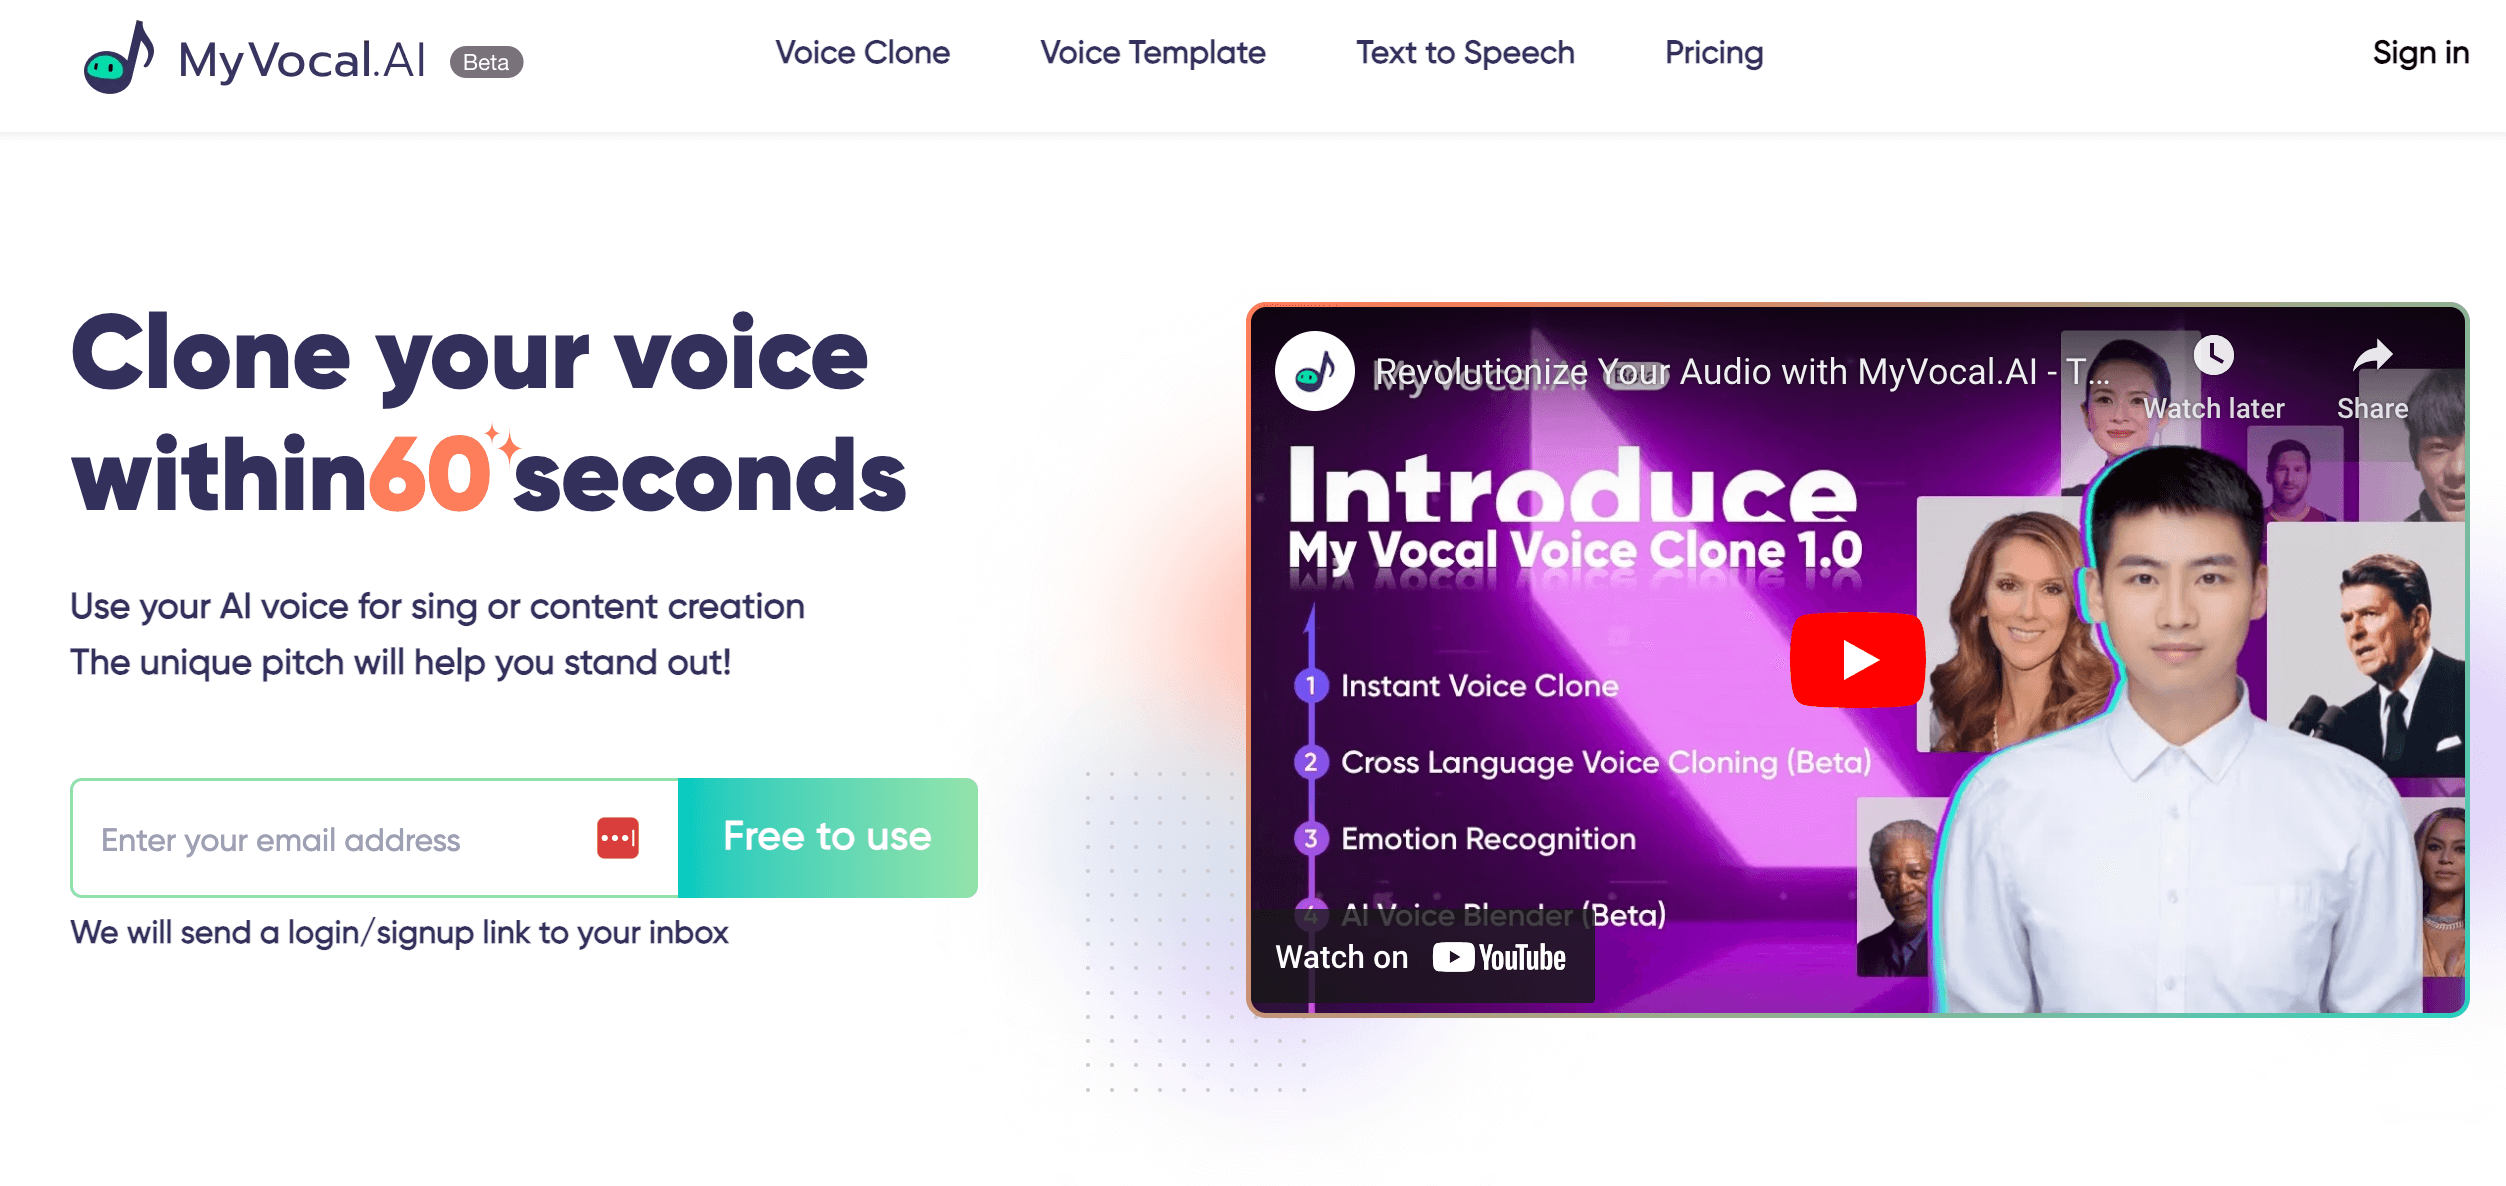 View of MyVocal AI Website